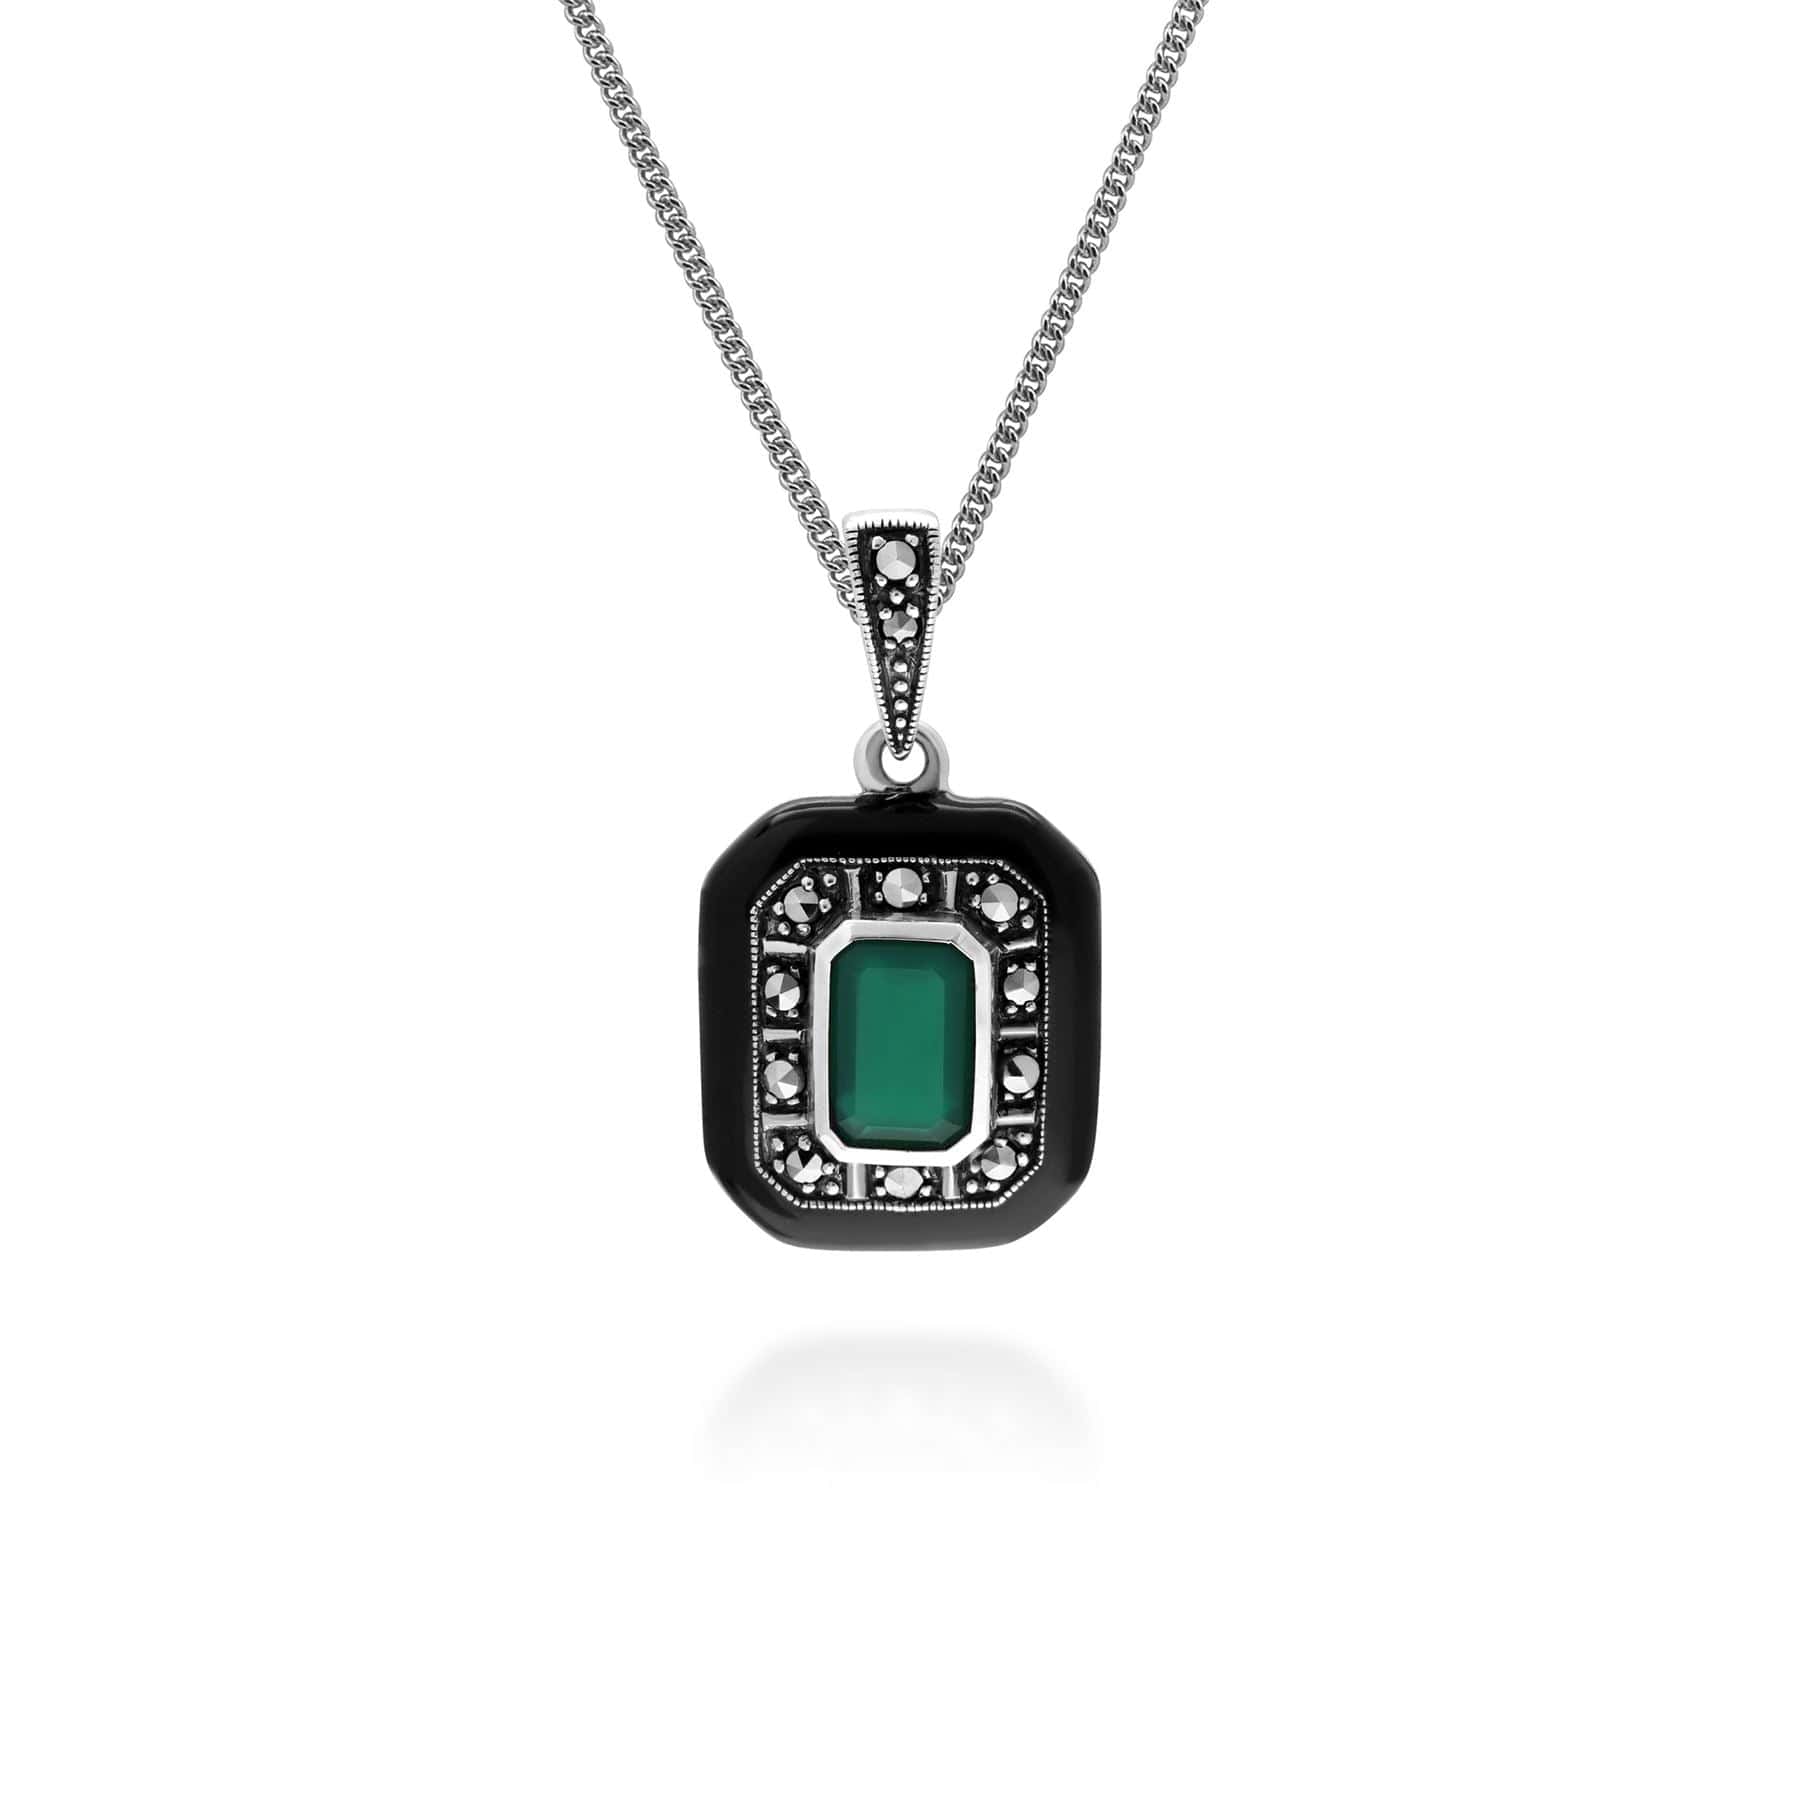 214P305001925 Art Deco Inspired Chalcedony, Enamel & Marcasite Pendant Necklace in Sterling Silver 1